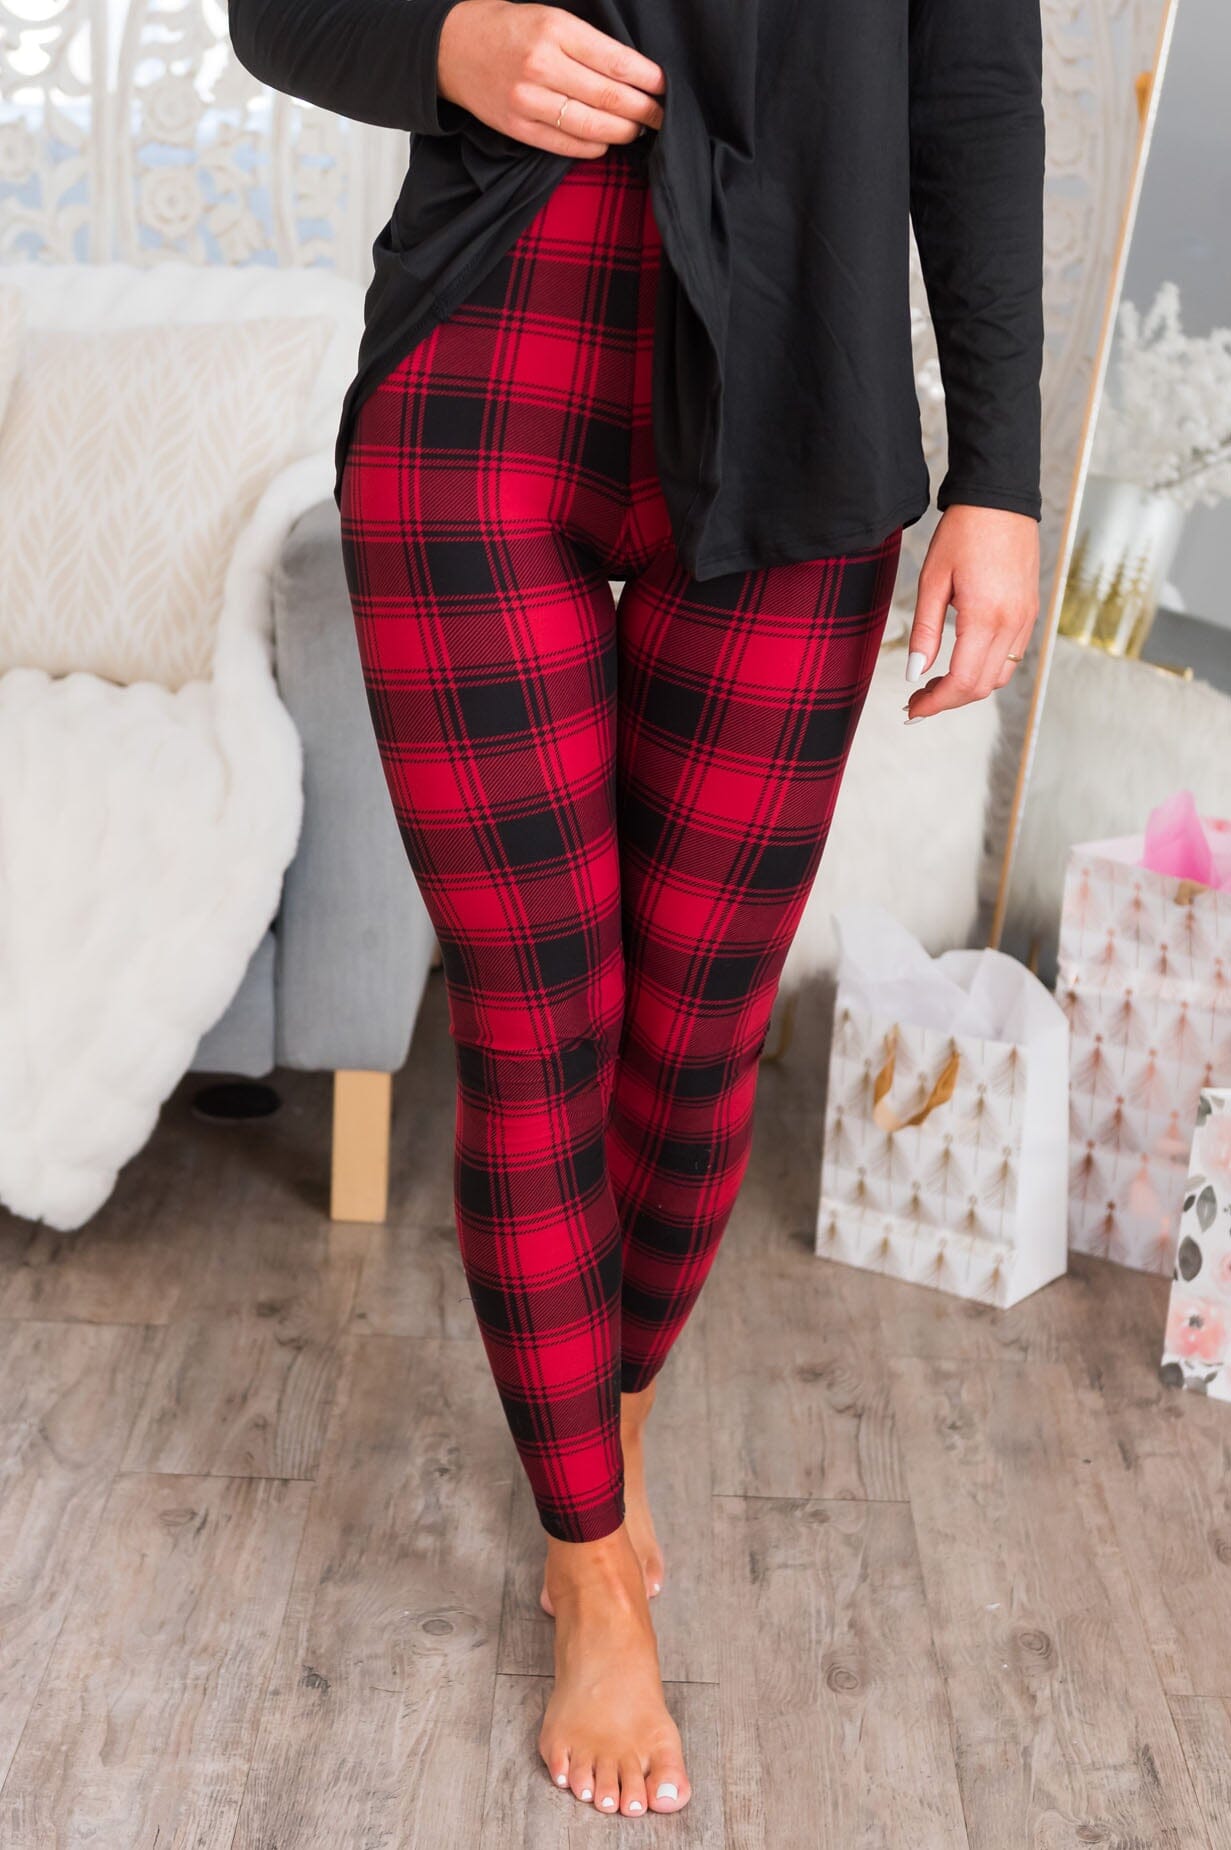 How to wear plaid leggings | What to wear, How to wear, My style